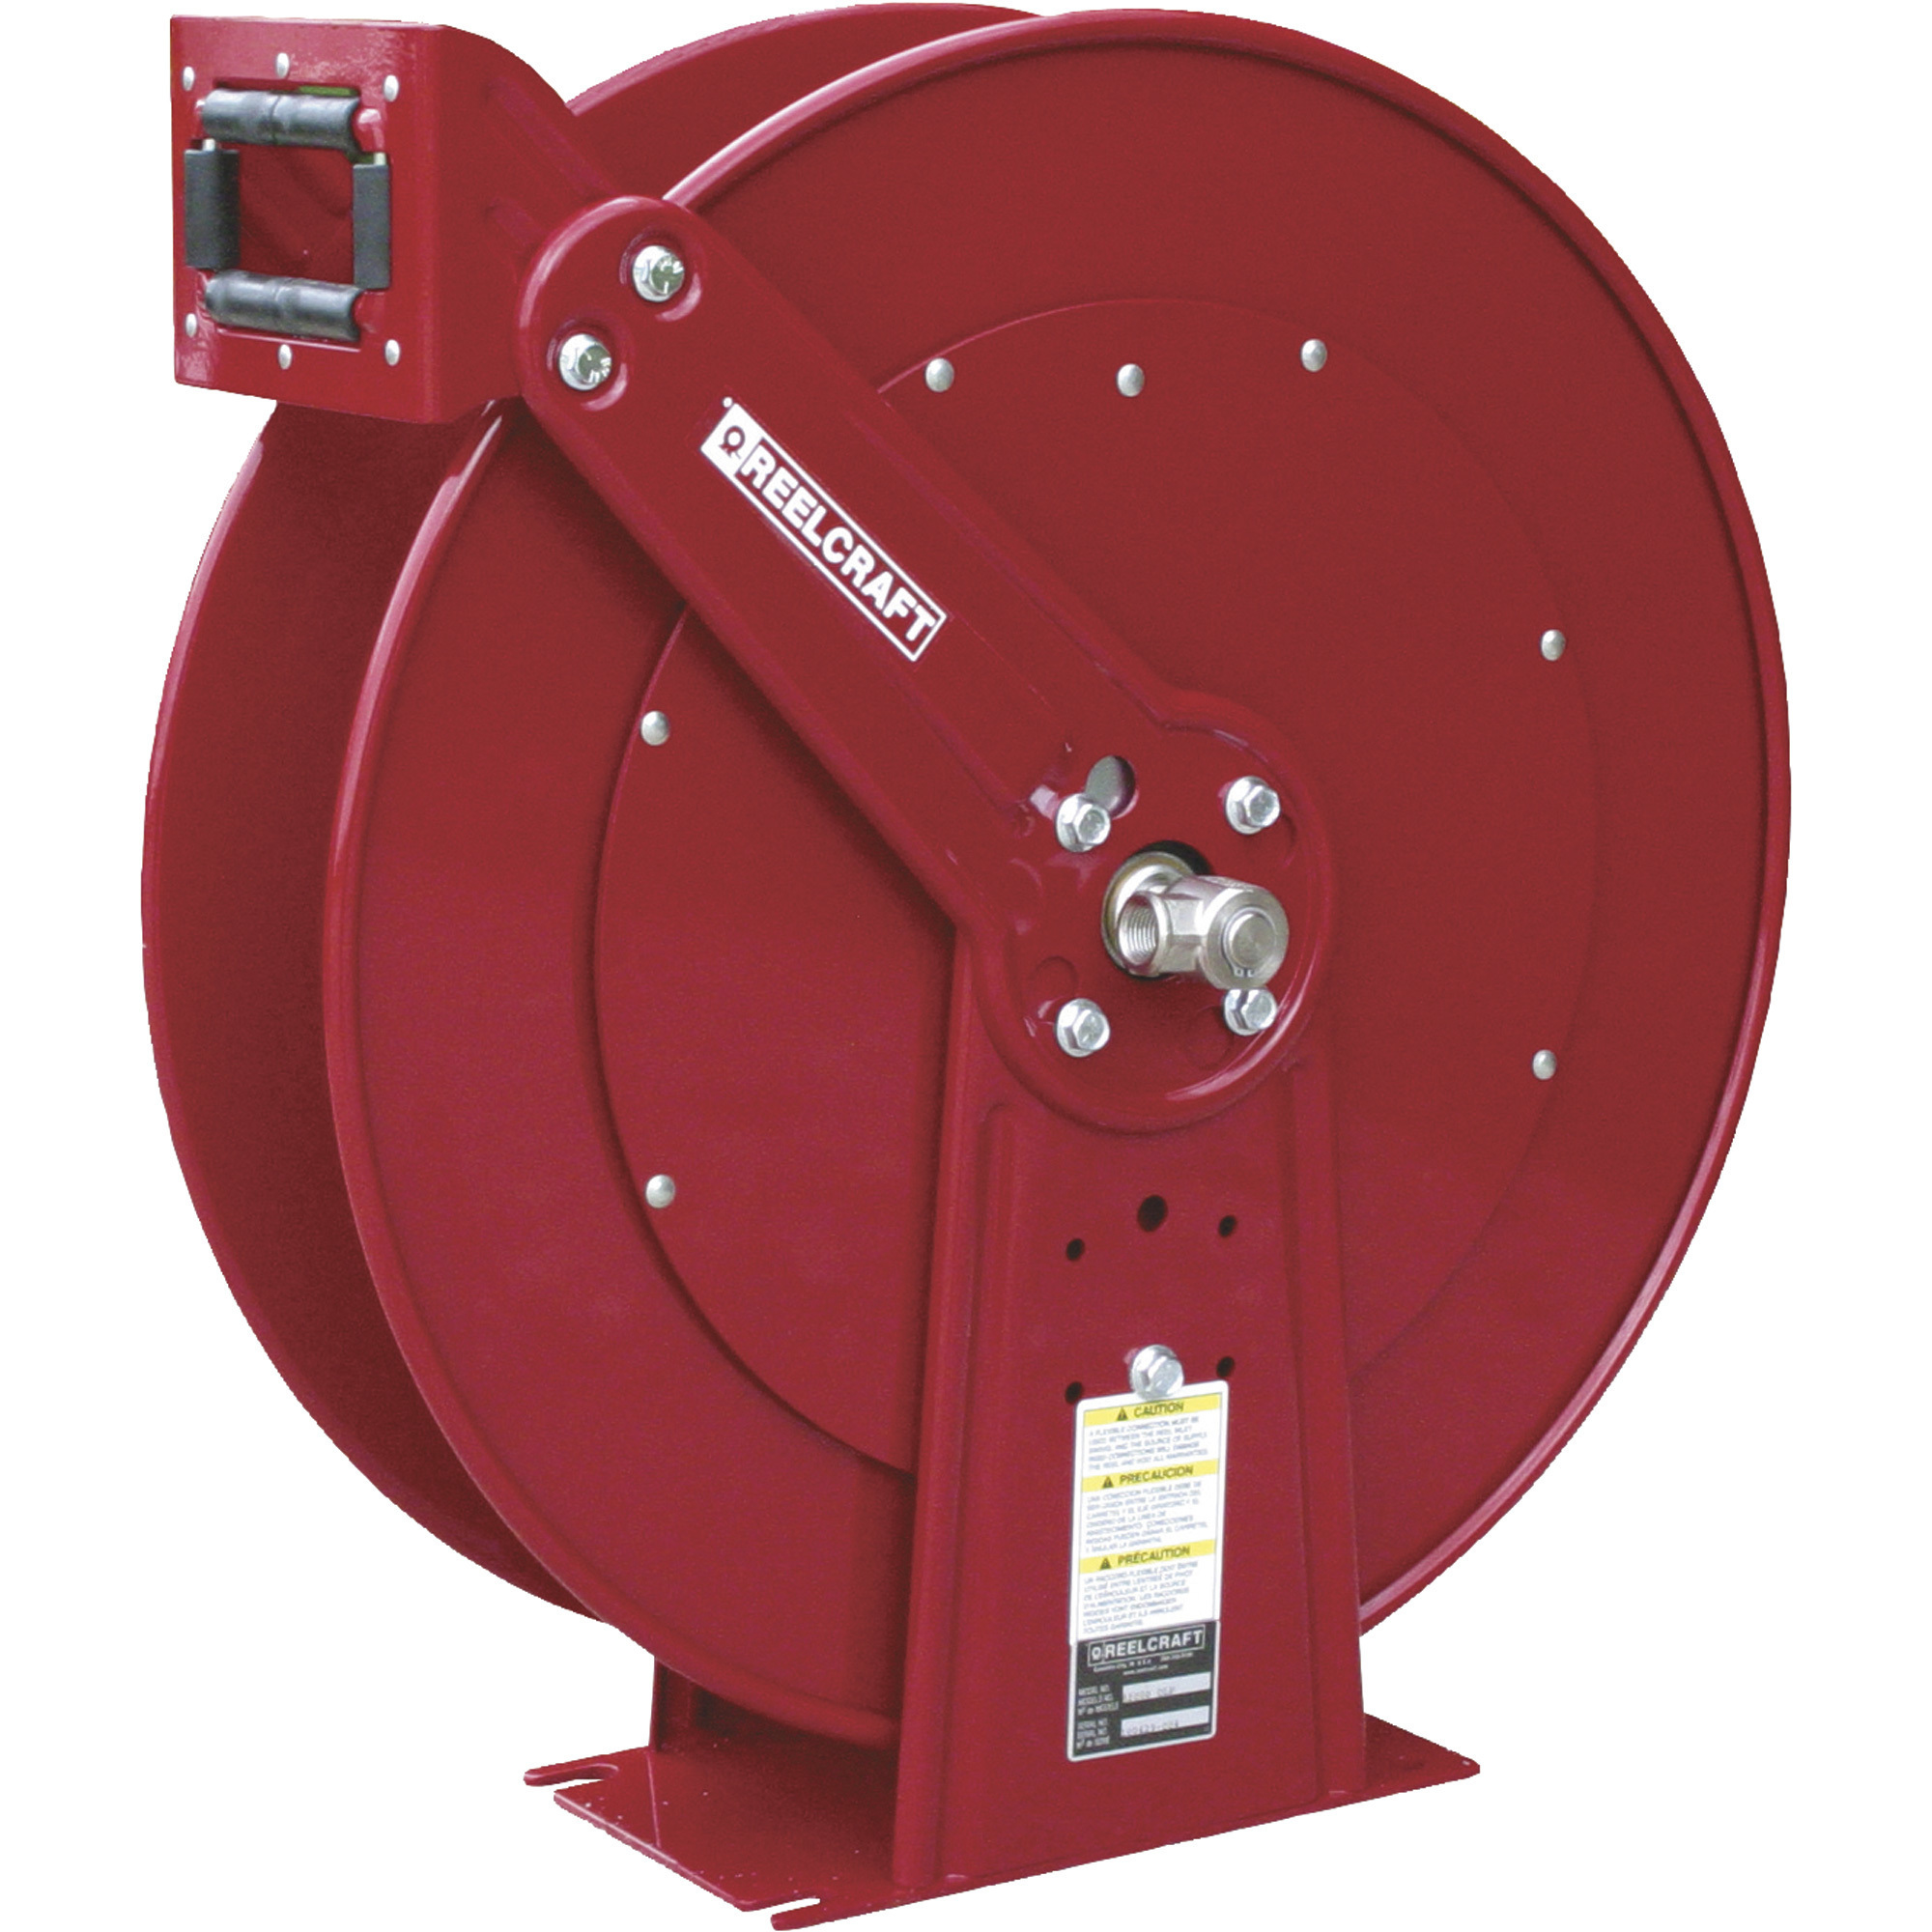 Retractable Hose Reel Product Feature - USA on Vimeo